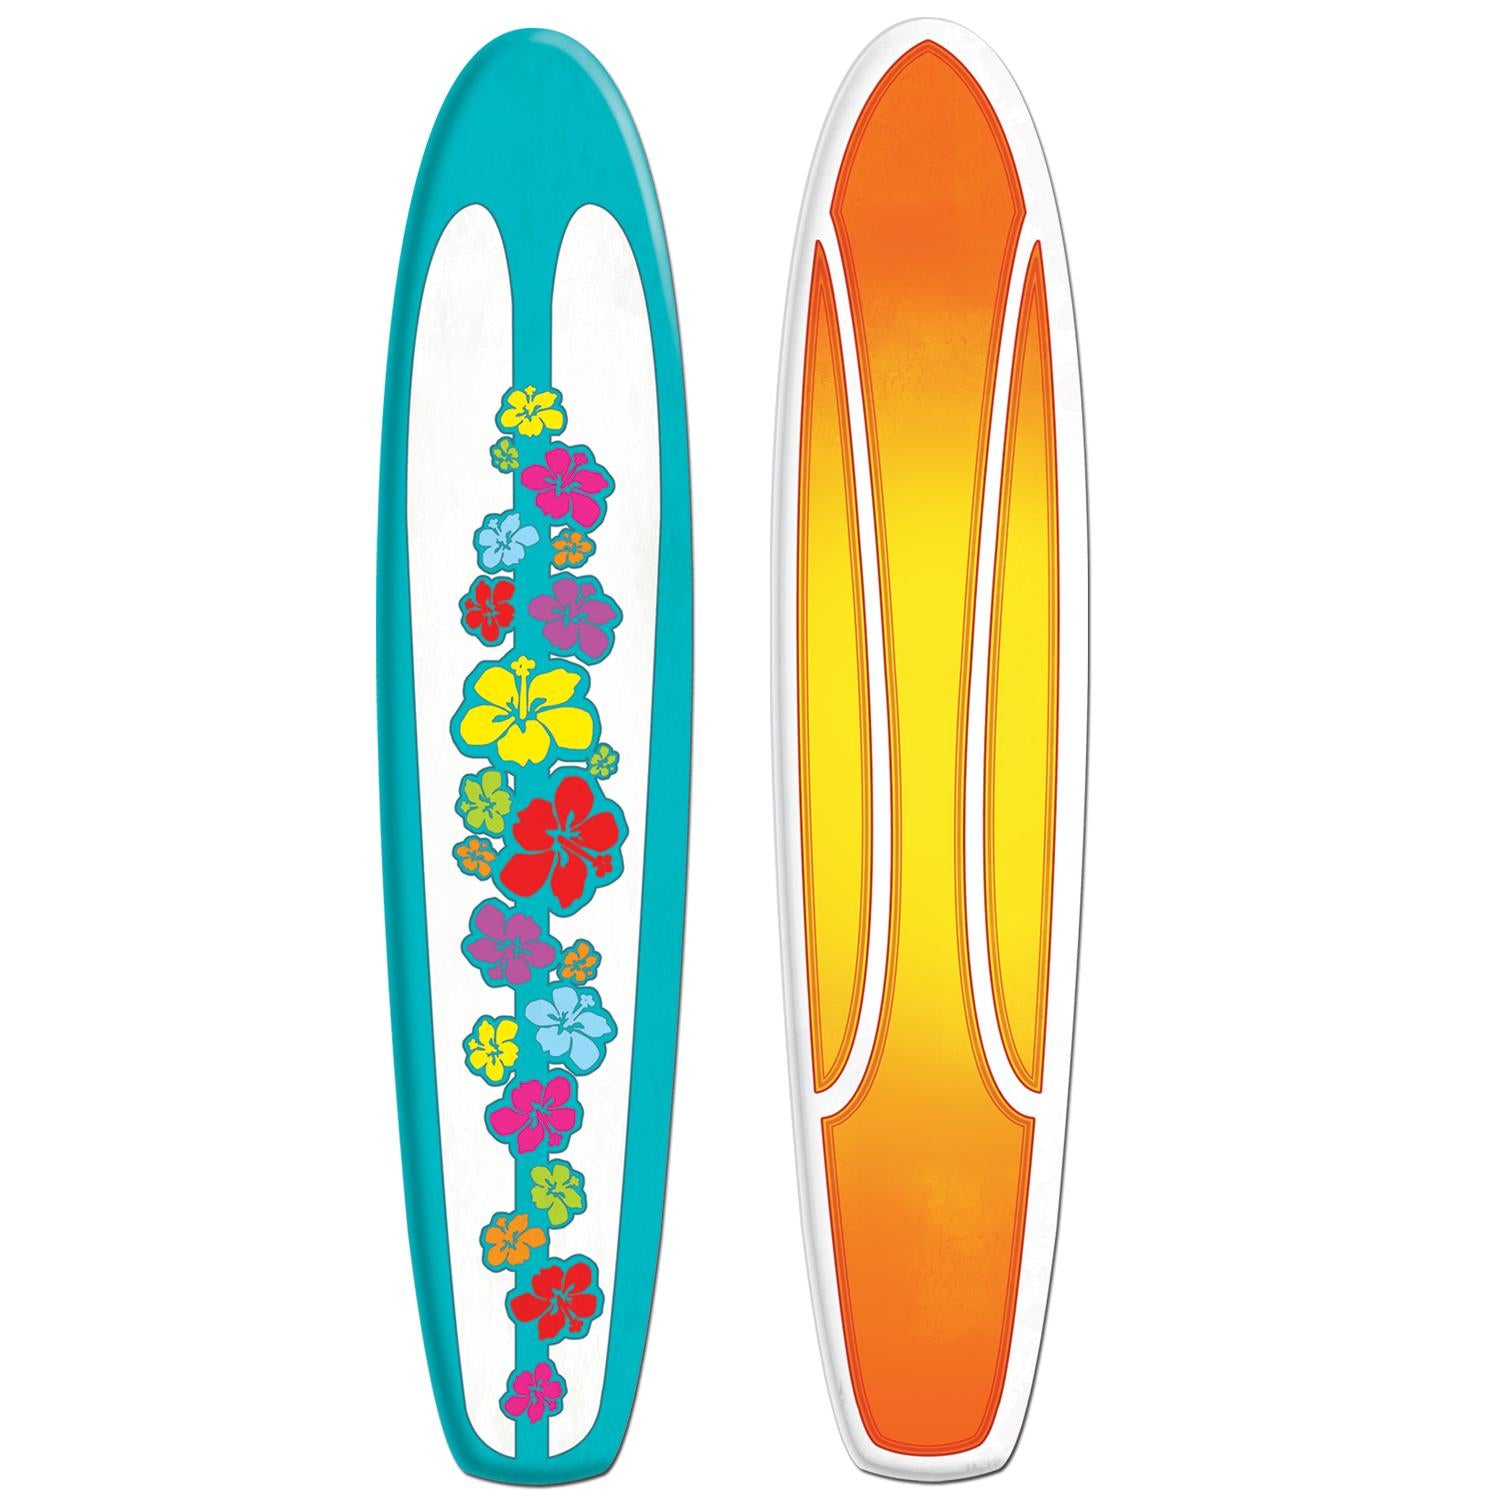 Beistle Luau Party Jointed Surfboard Decorations